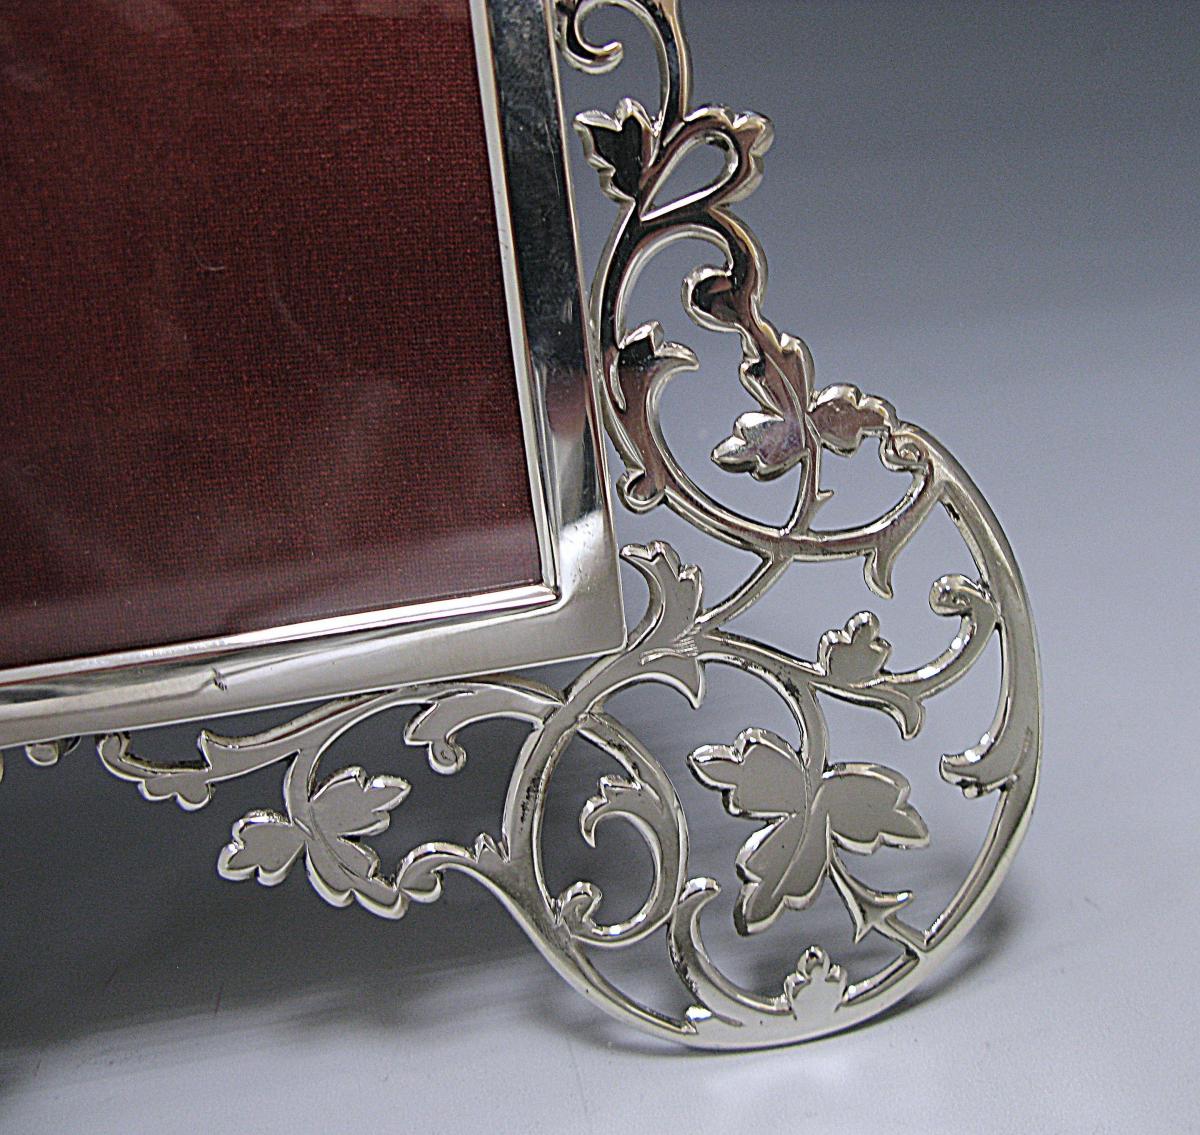 Antique Sterling Silver Photo Frame